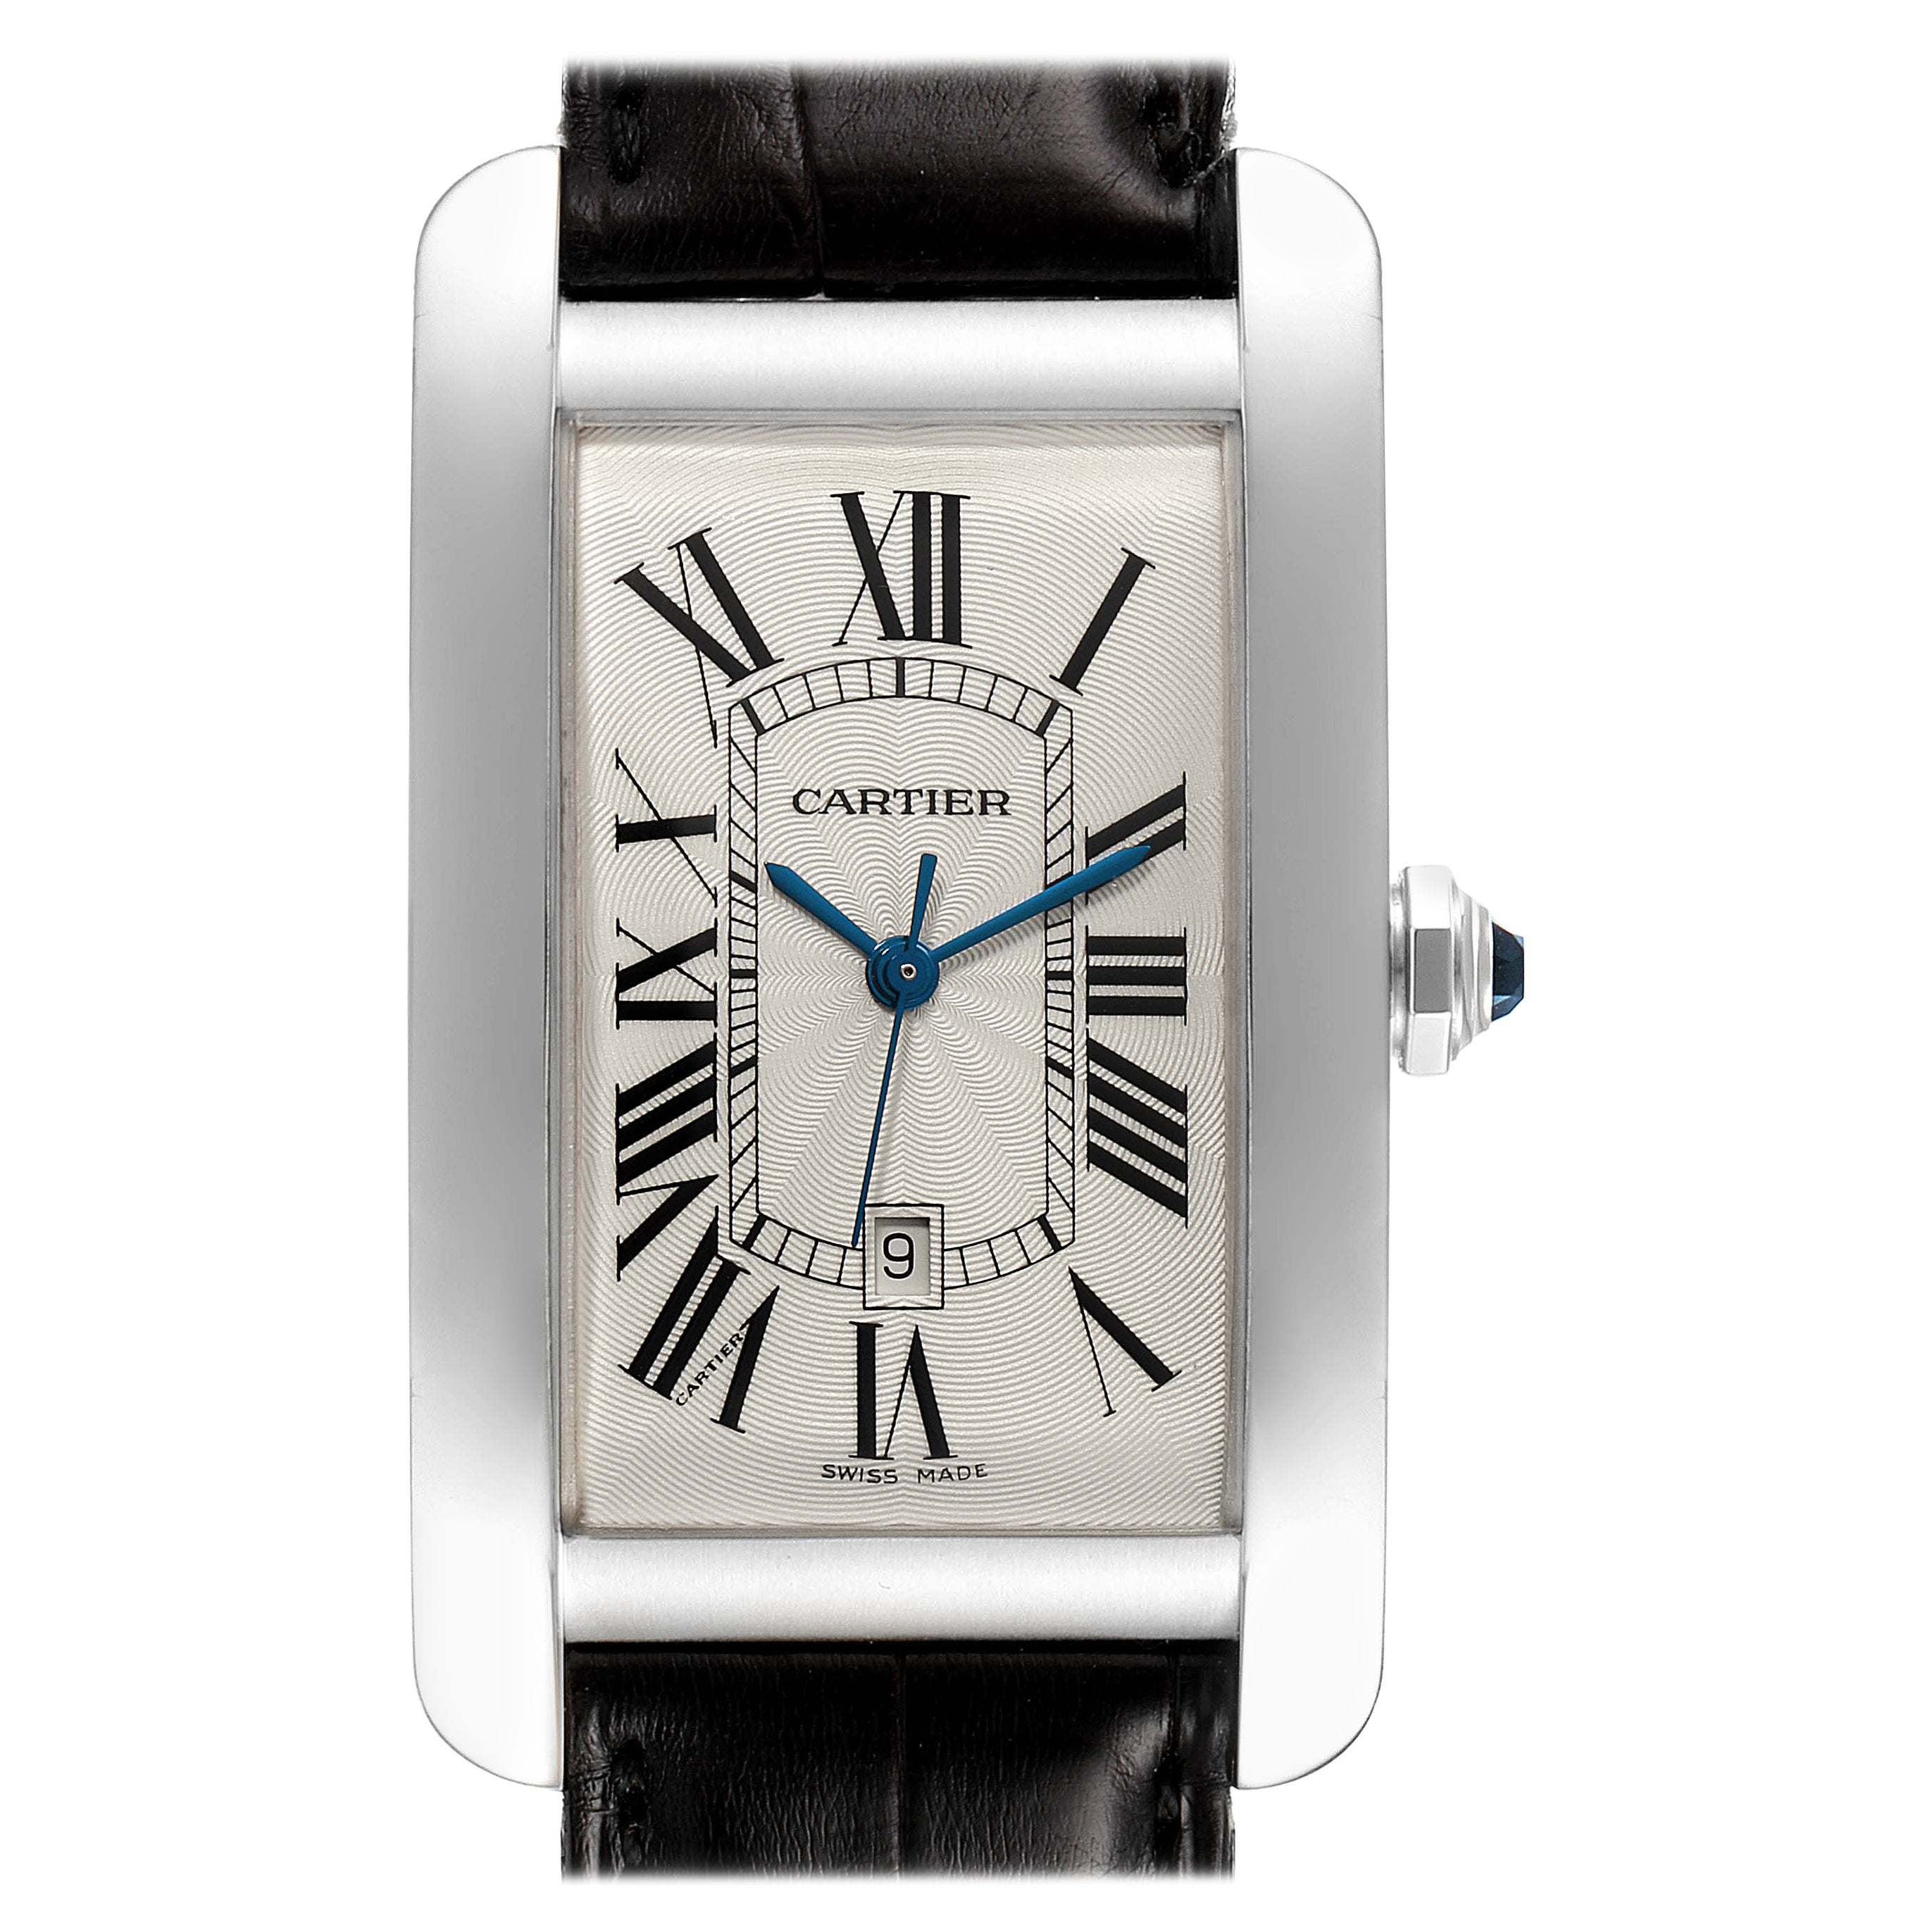 Cartier Tank Americaine 18K White Gold Large Mens Watch W2603256